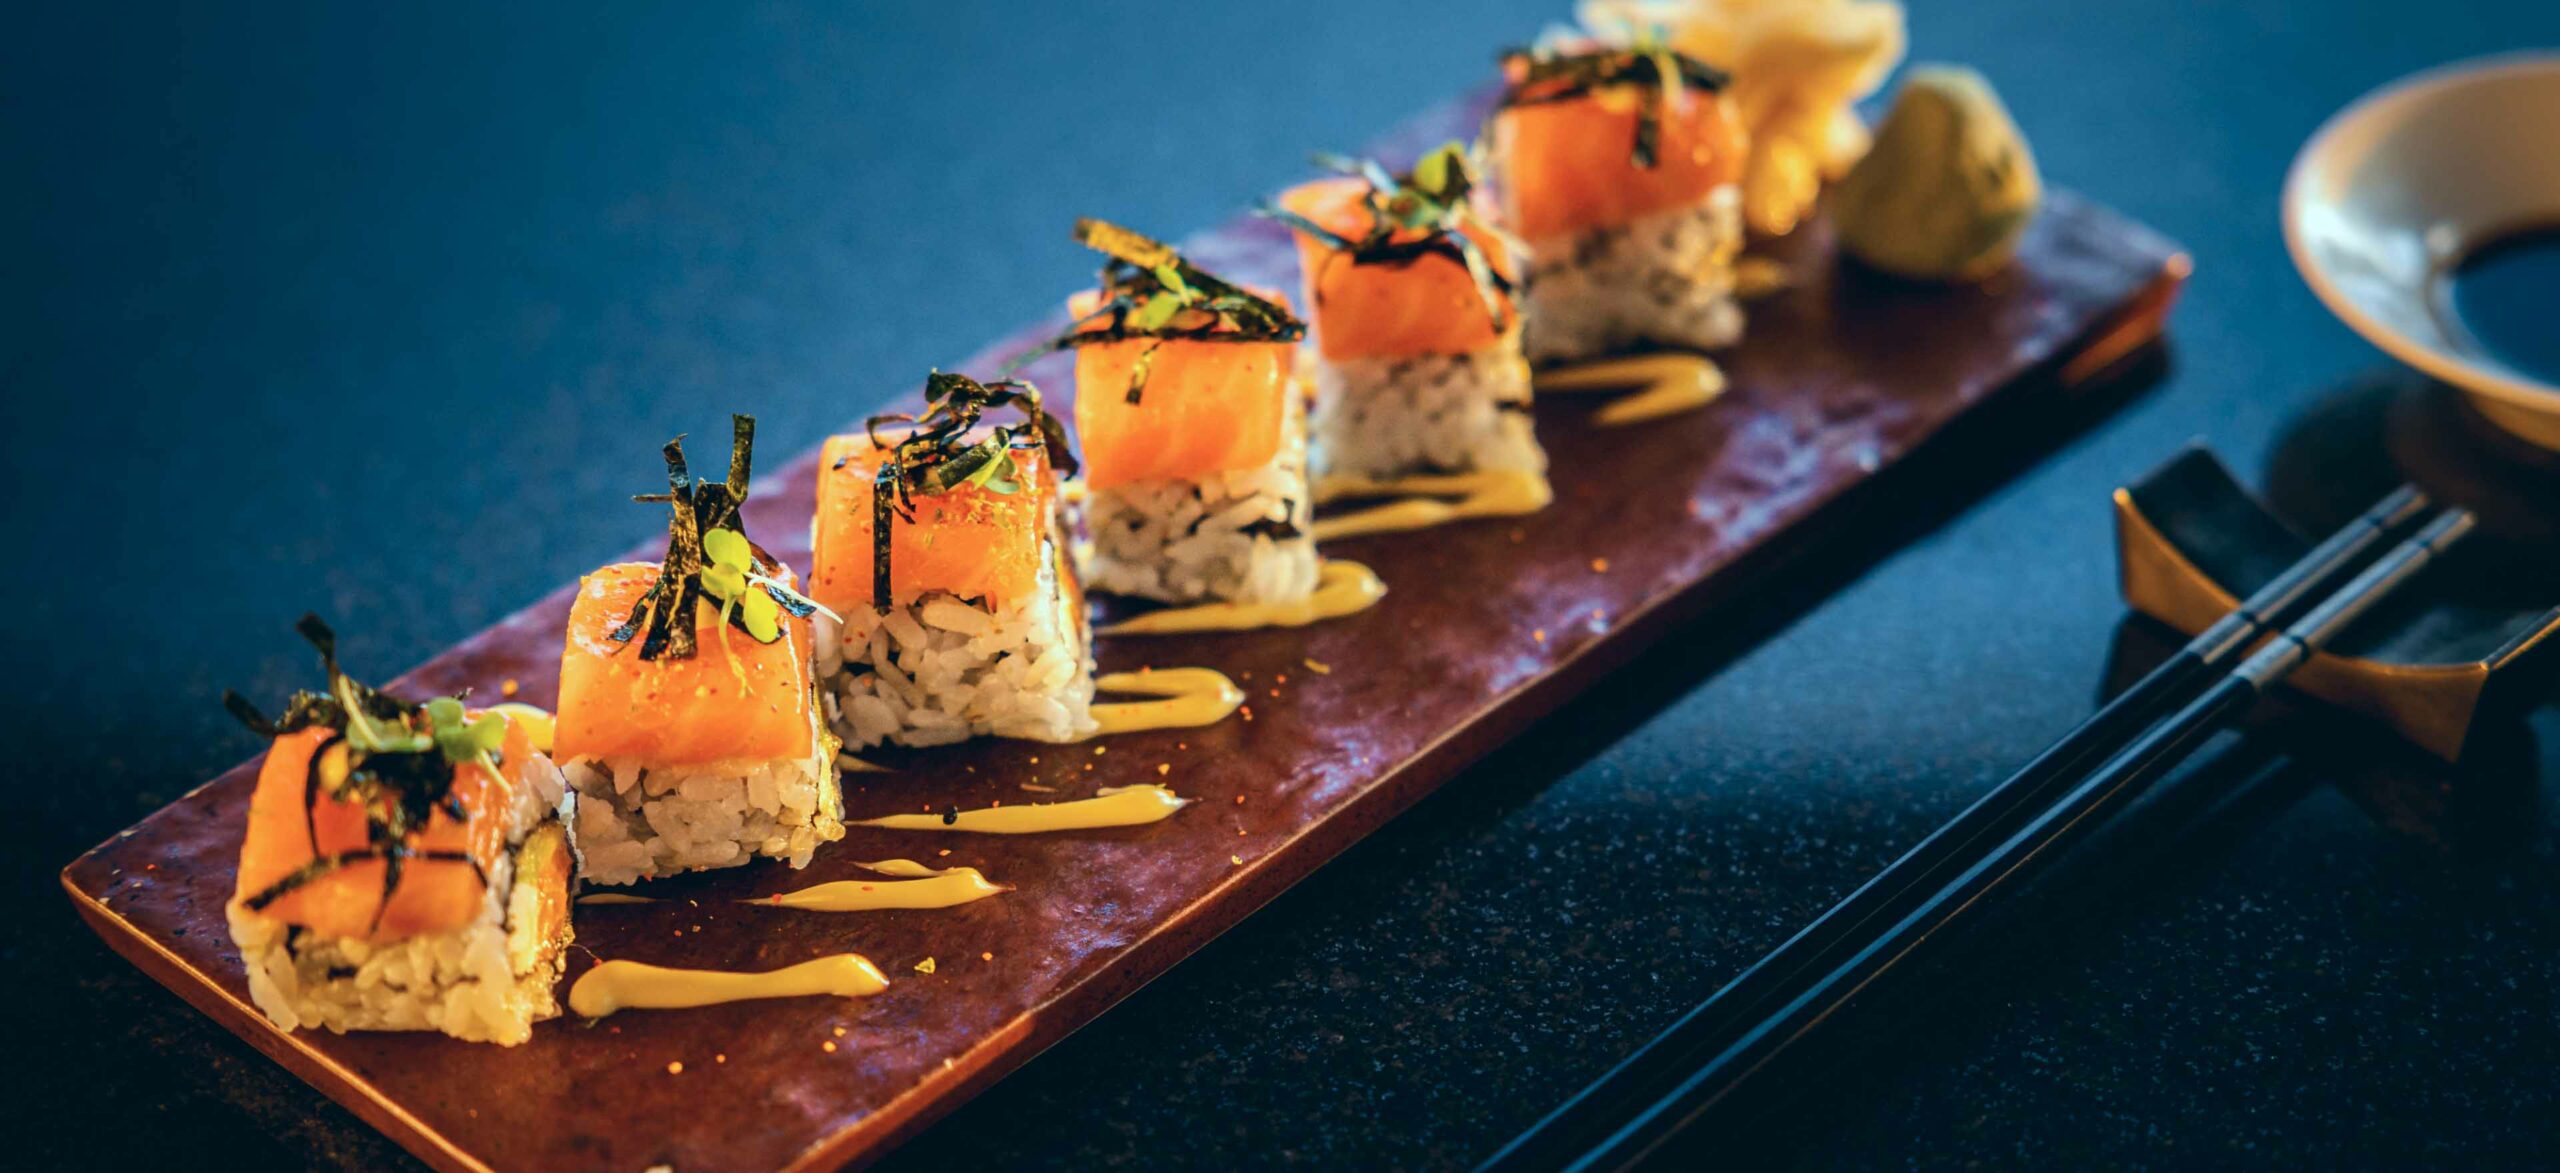 Sushi at Feeling Koi, Elevated Japanese Cuisine & fine dining in the Maldives.